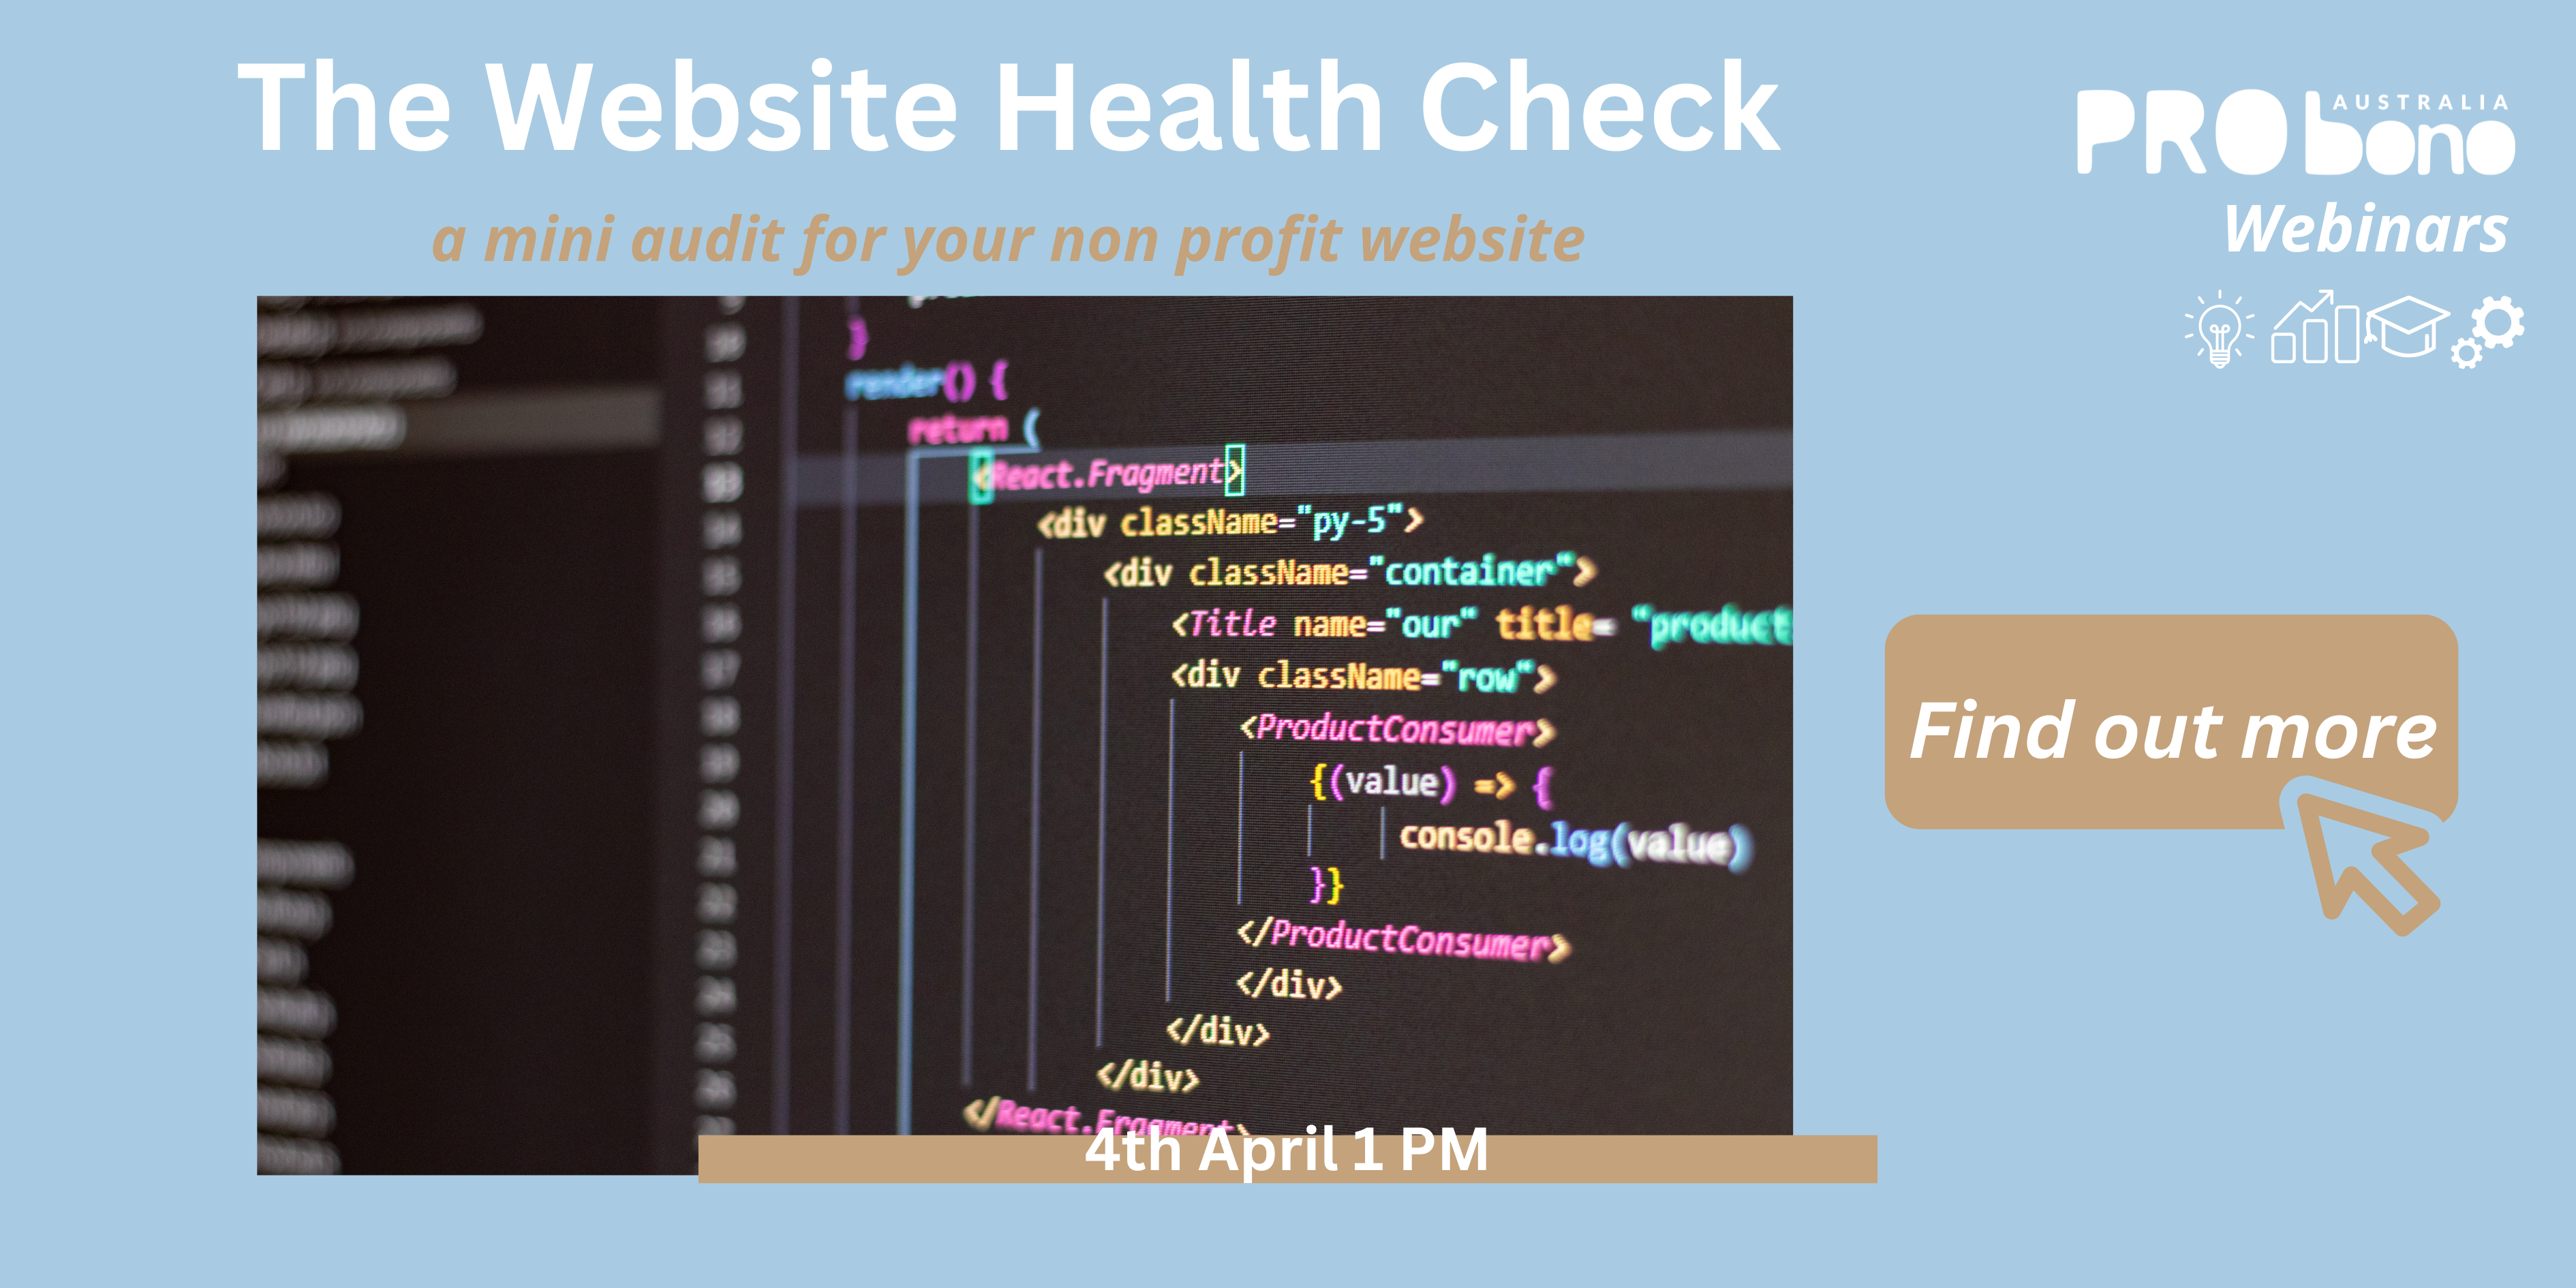 The Website Health Check - a mini audit for your non profit website. 4th April 1 PM. Find out more.